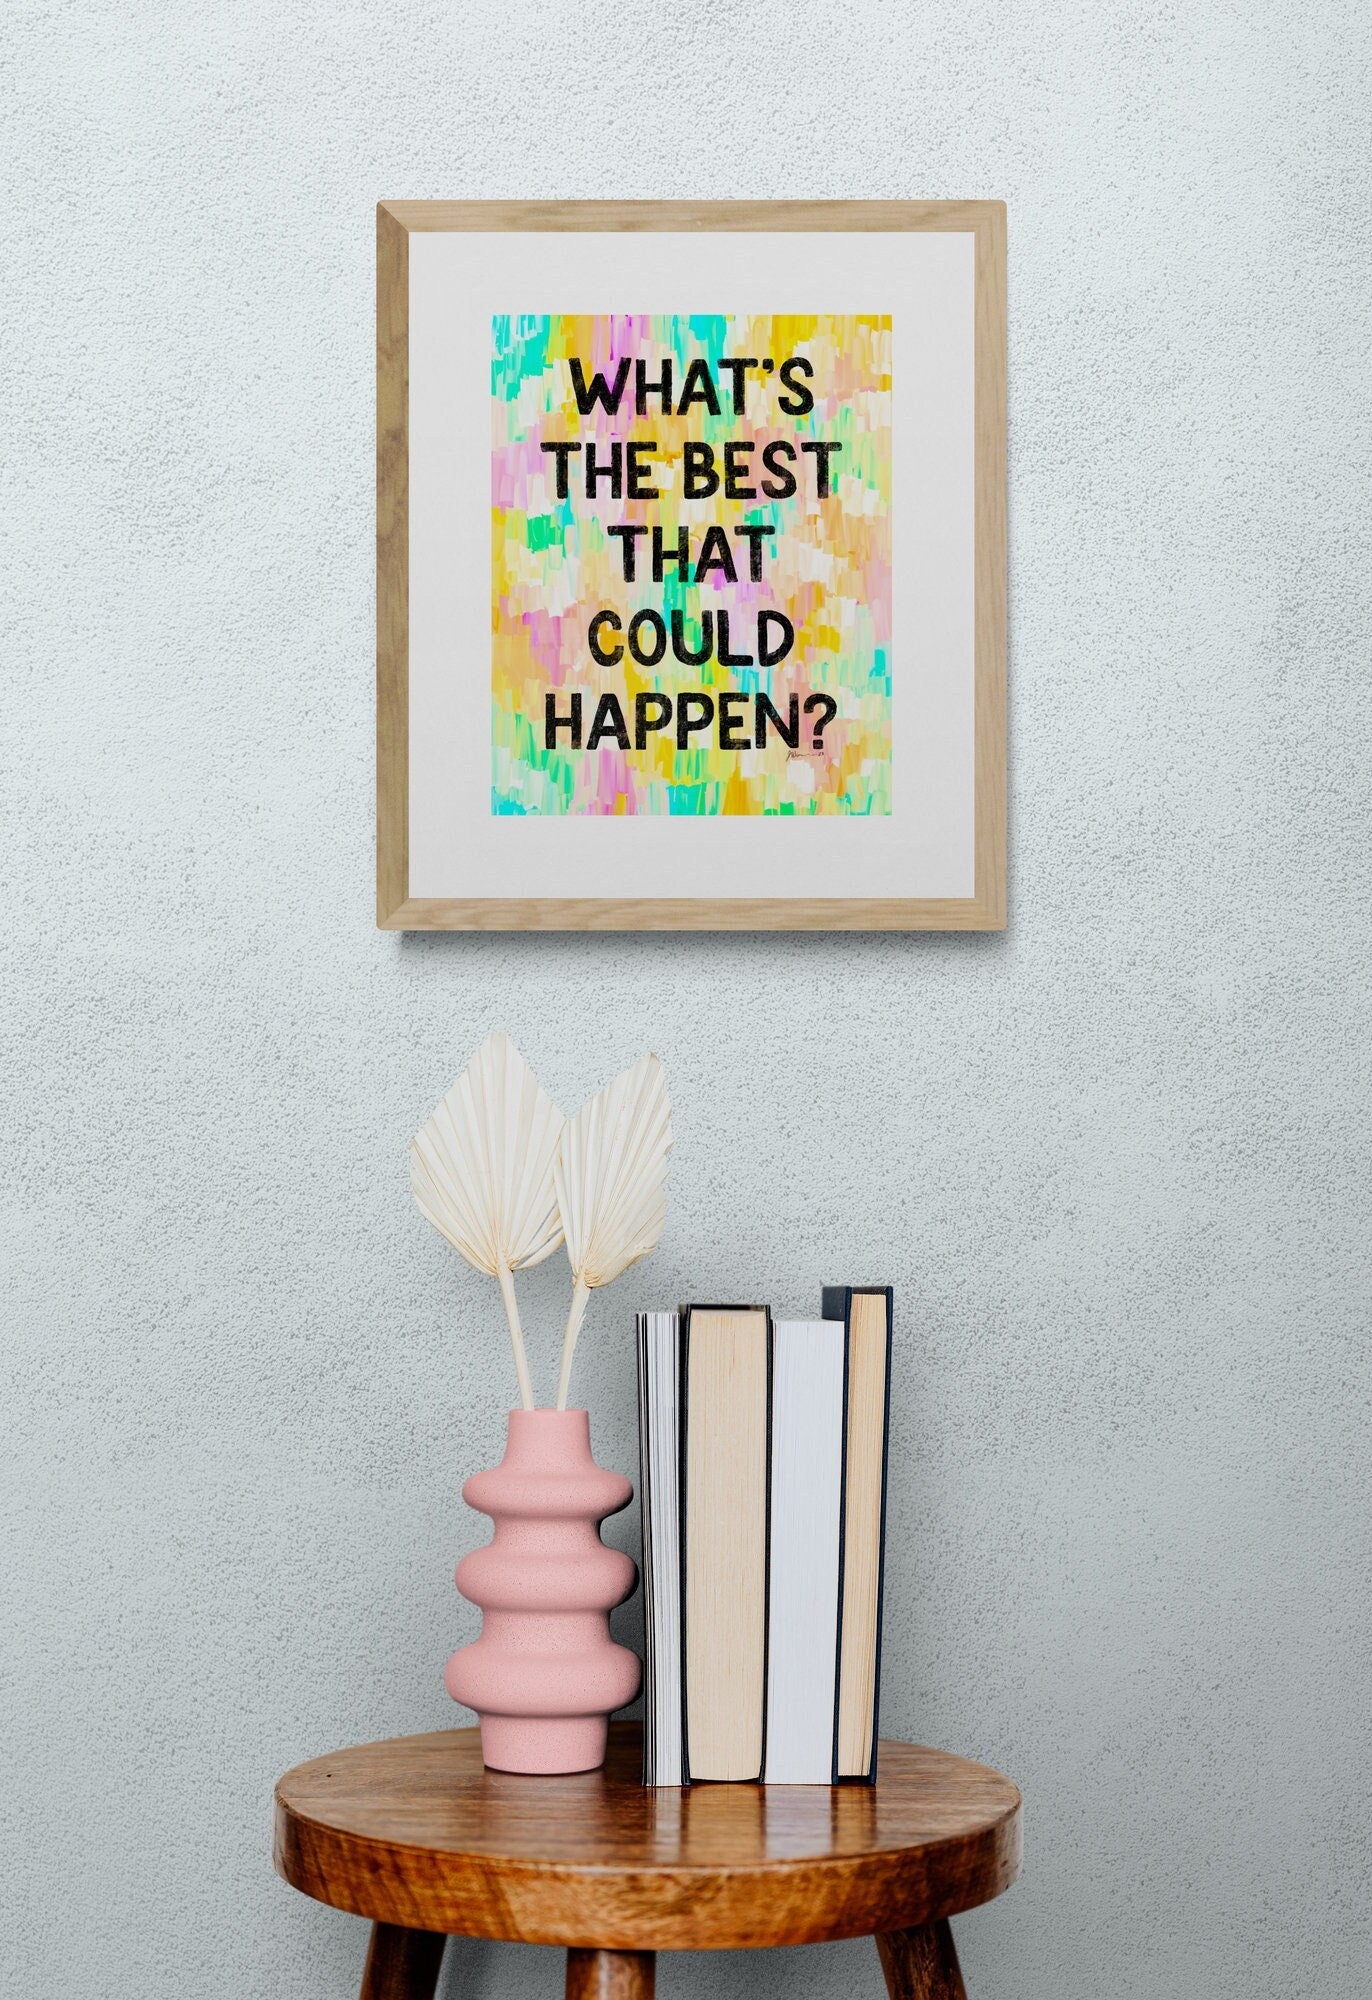 What’s the best that could happen? Inspirational Giclée Art Print 8” x 10” with Colorful Abstract Background